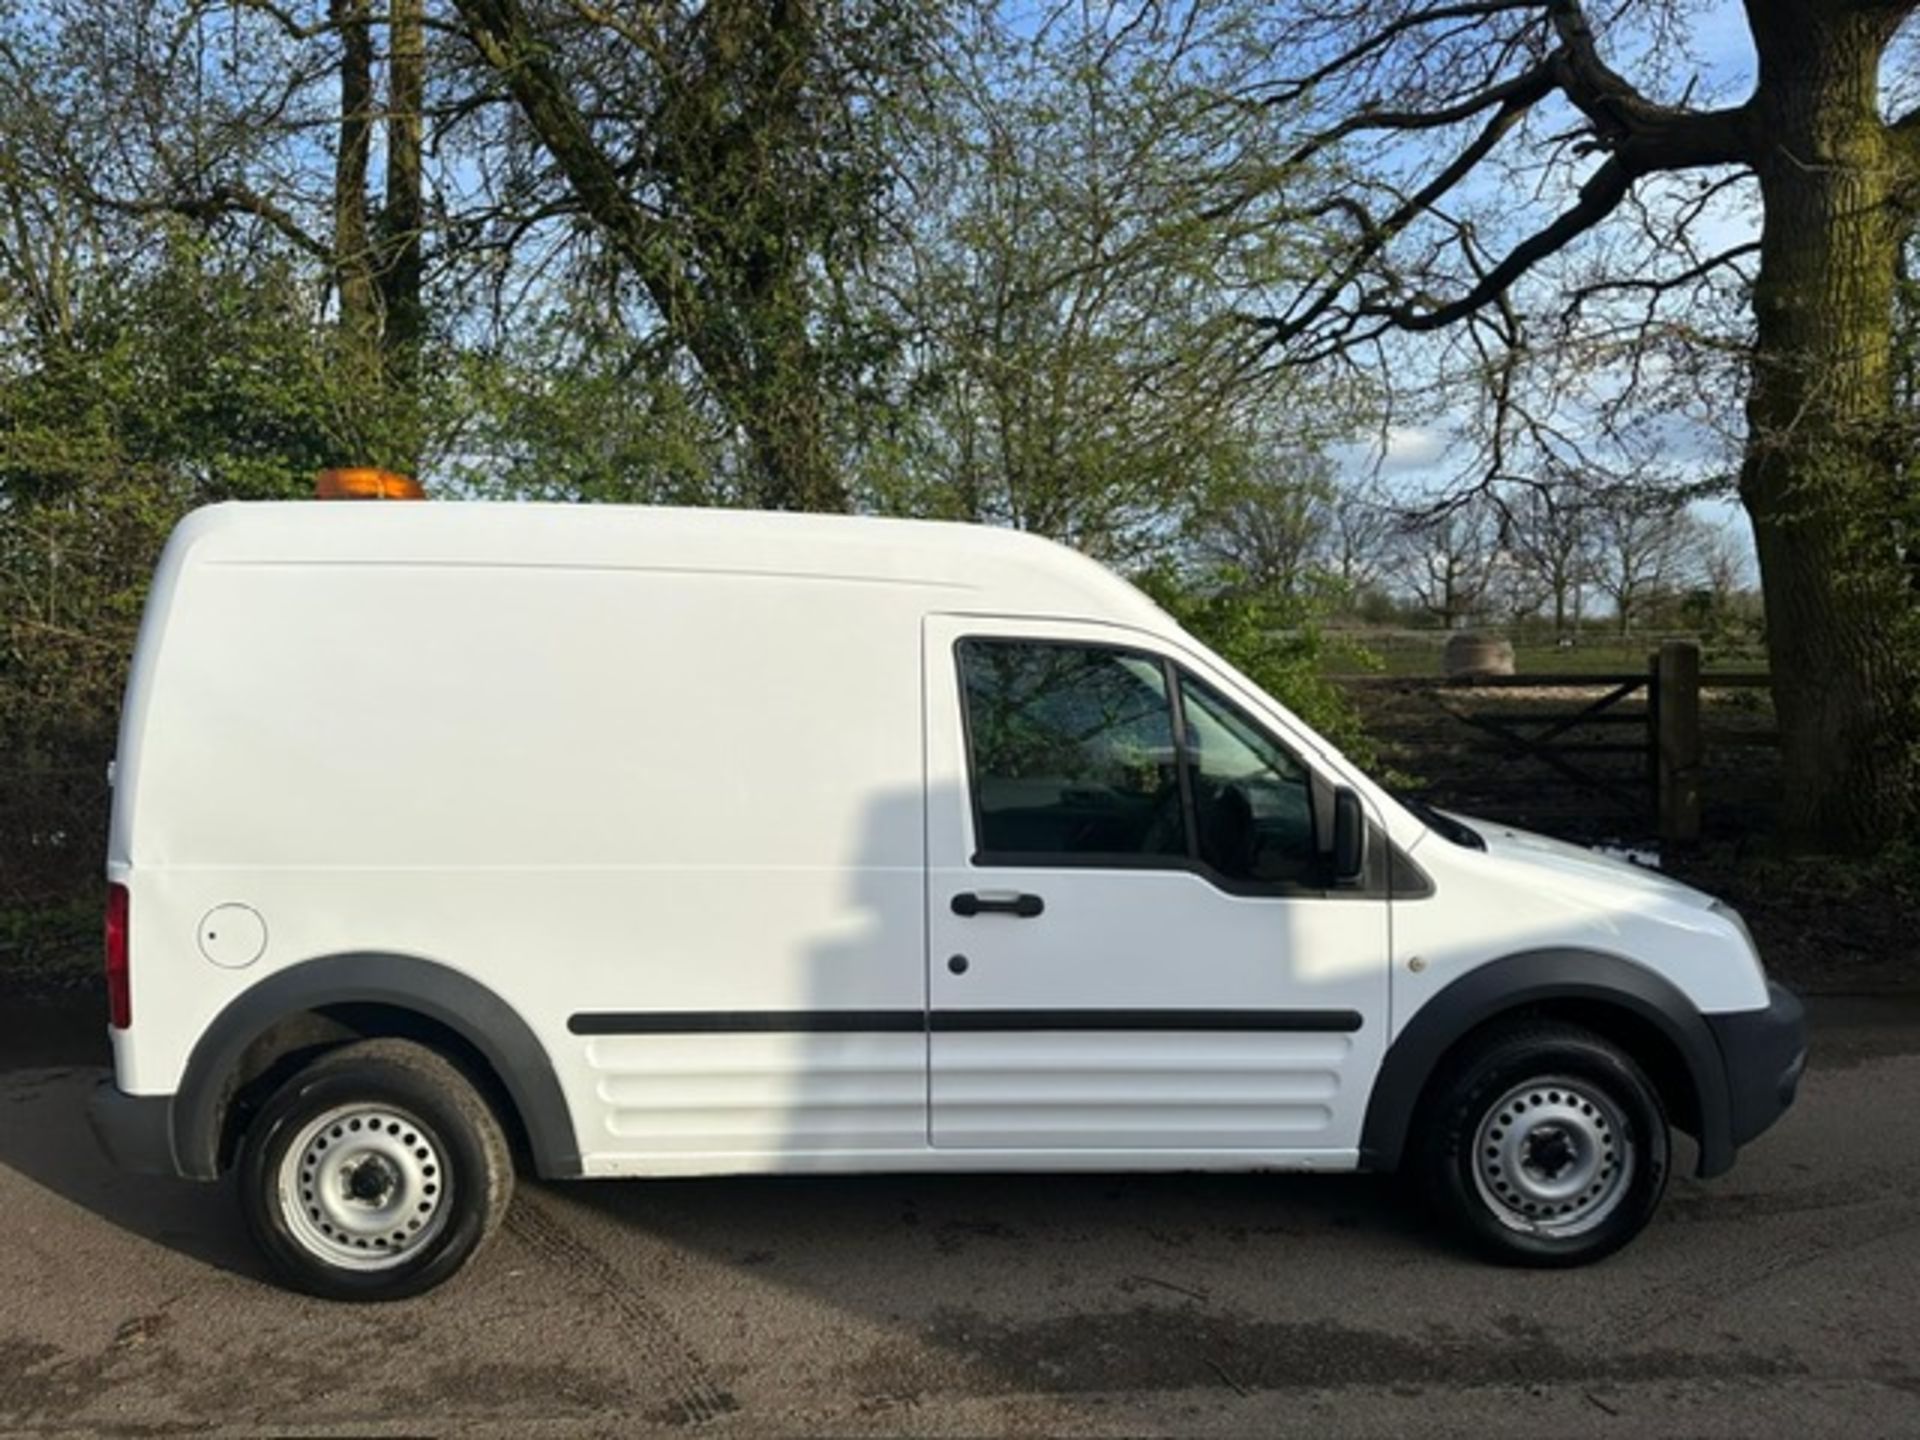 FORD TRANSIT CONNECT PANEL VAN REG:BV13 NKS 1.8LITRE. HIGH ROOF LWB. 83K REC MILES APPROX. WITH V5 A - Image 10 of 26